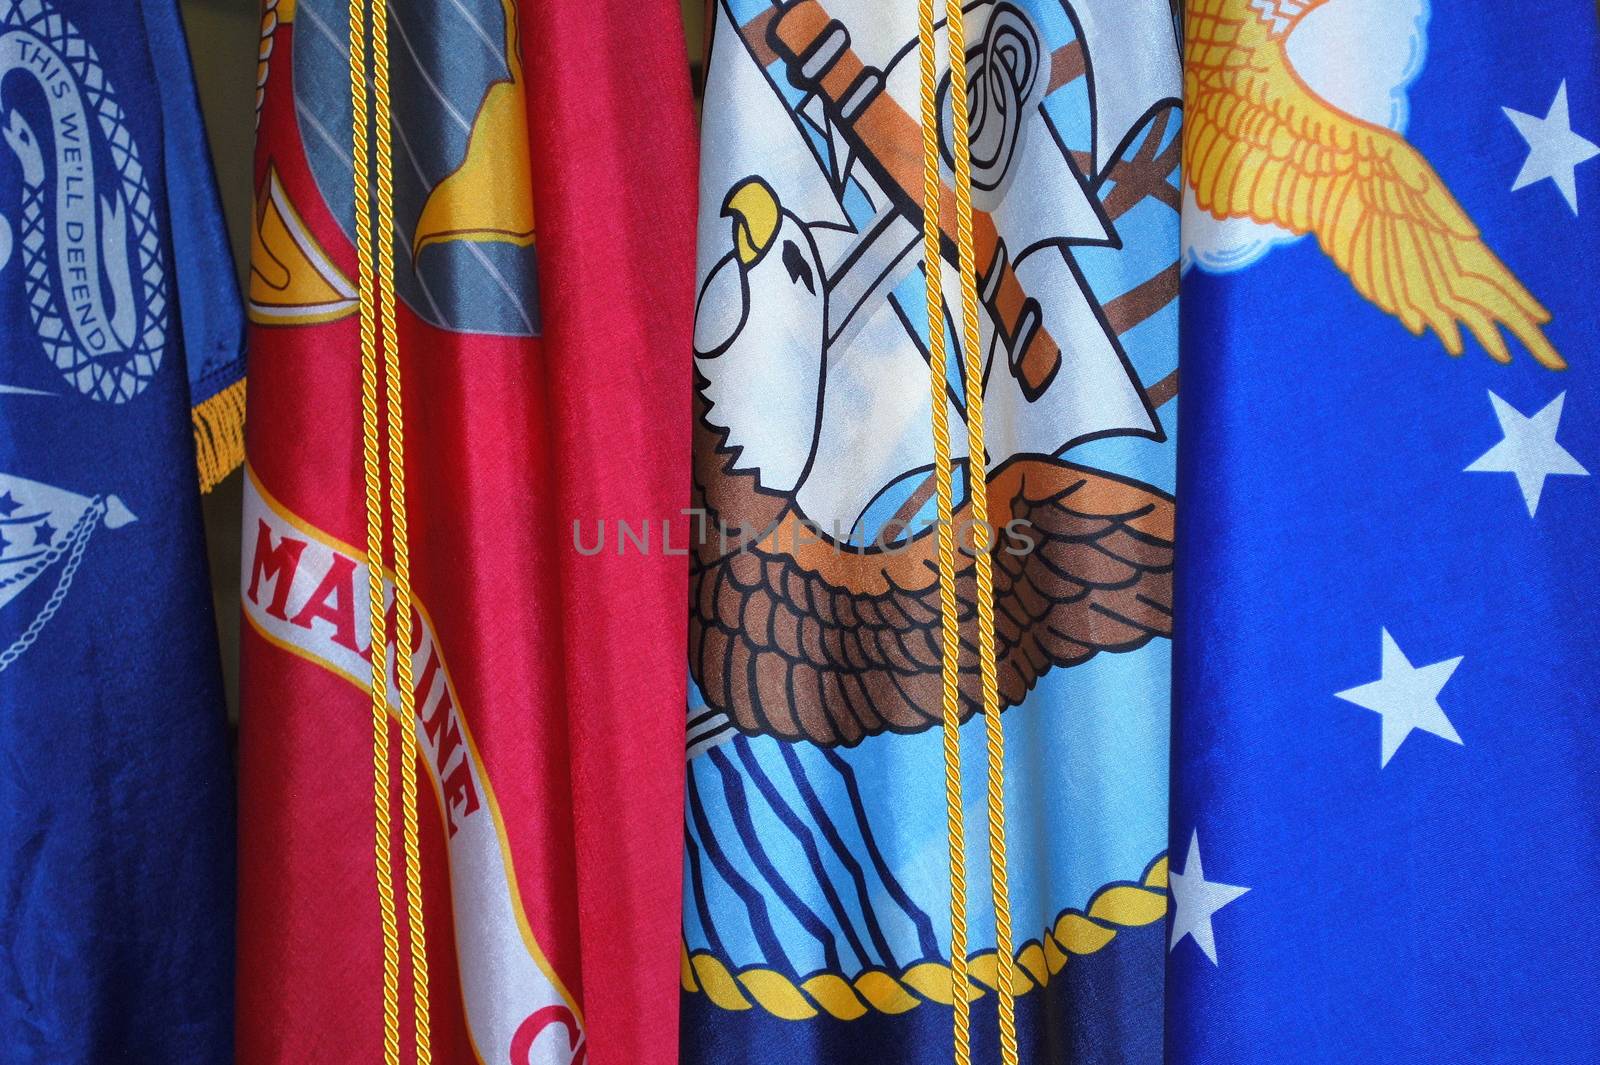 Military flags displayed indoors.